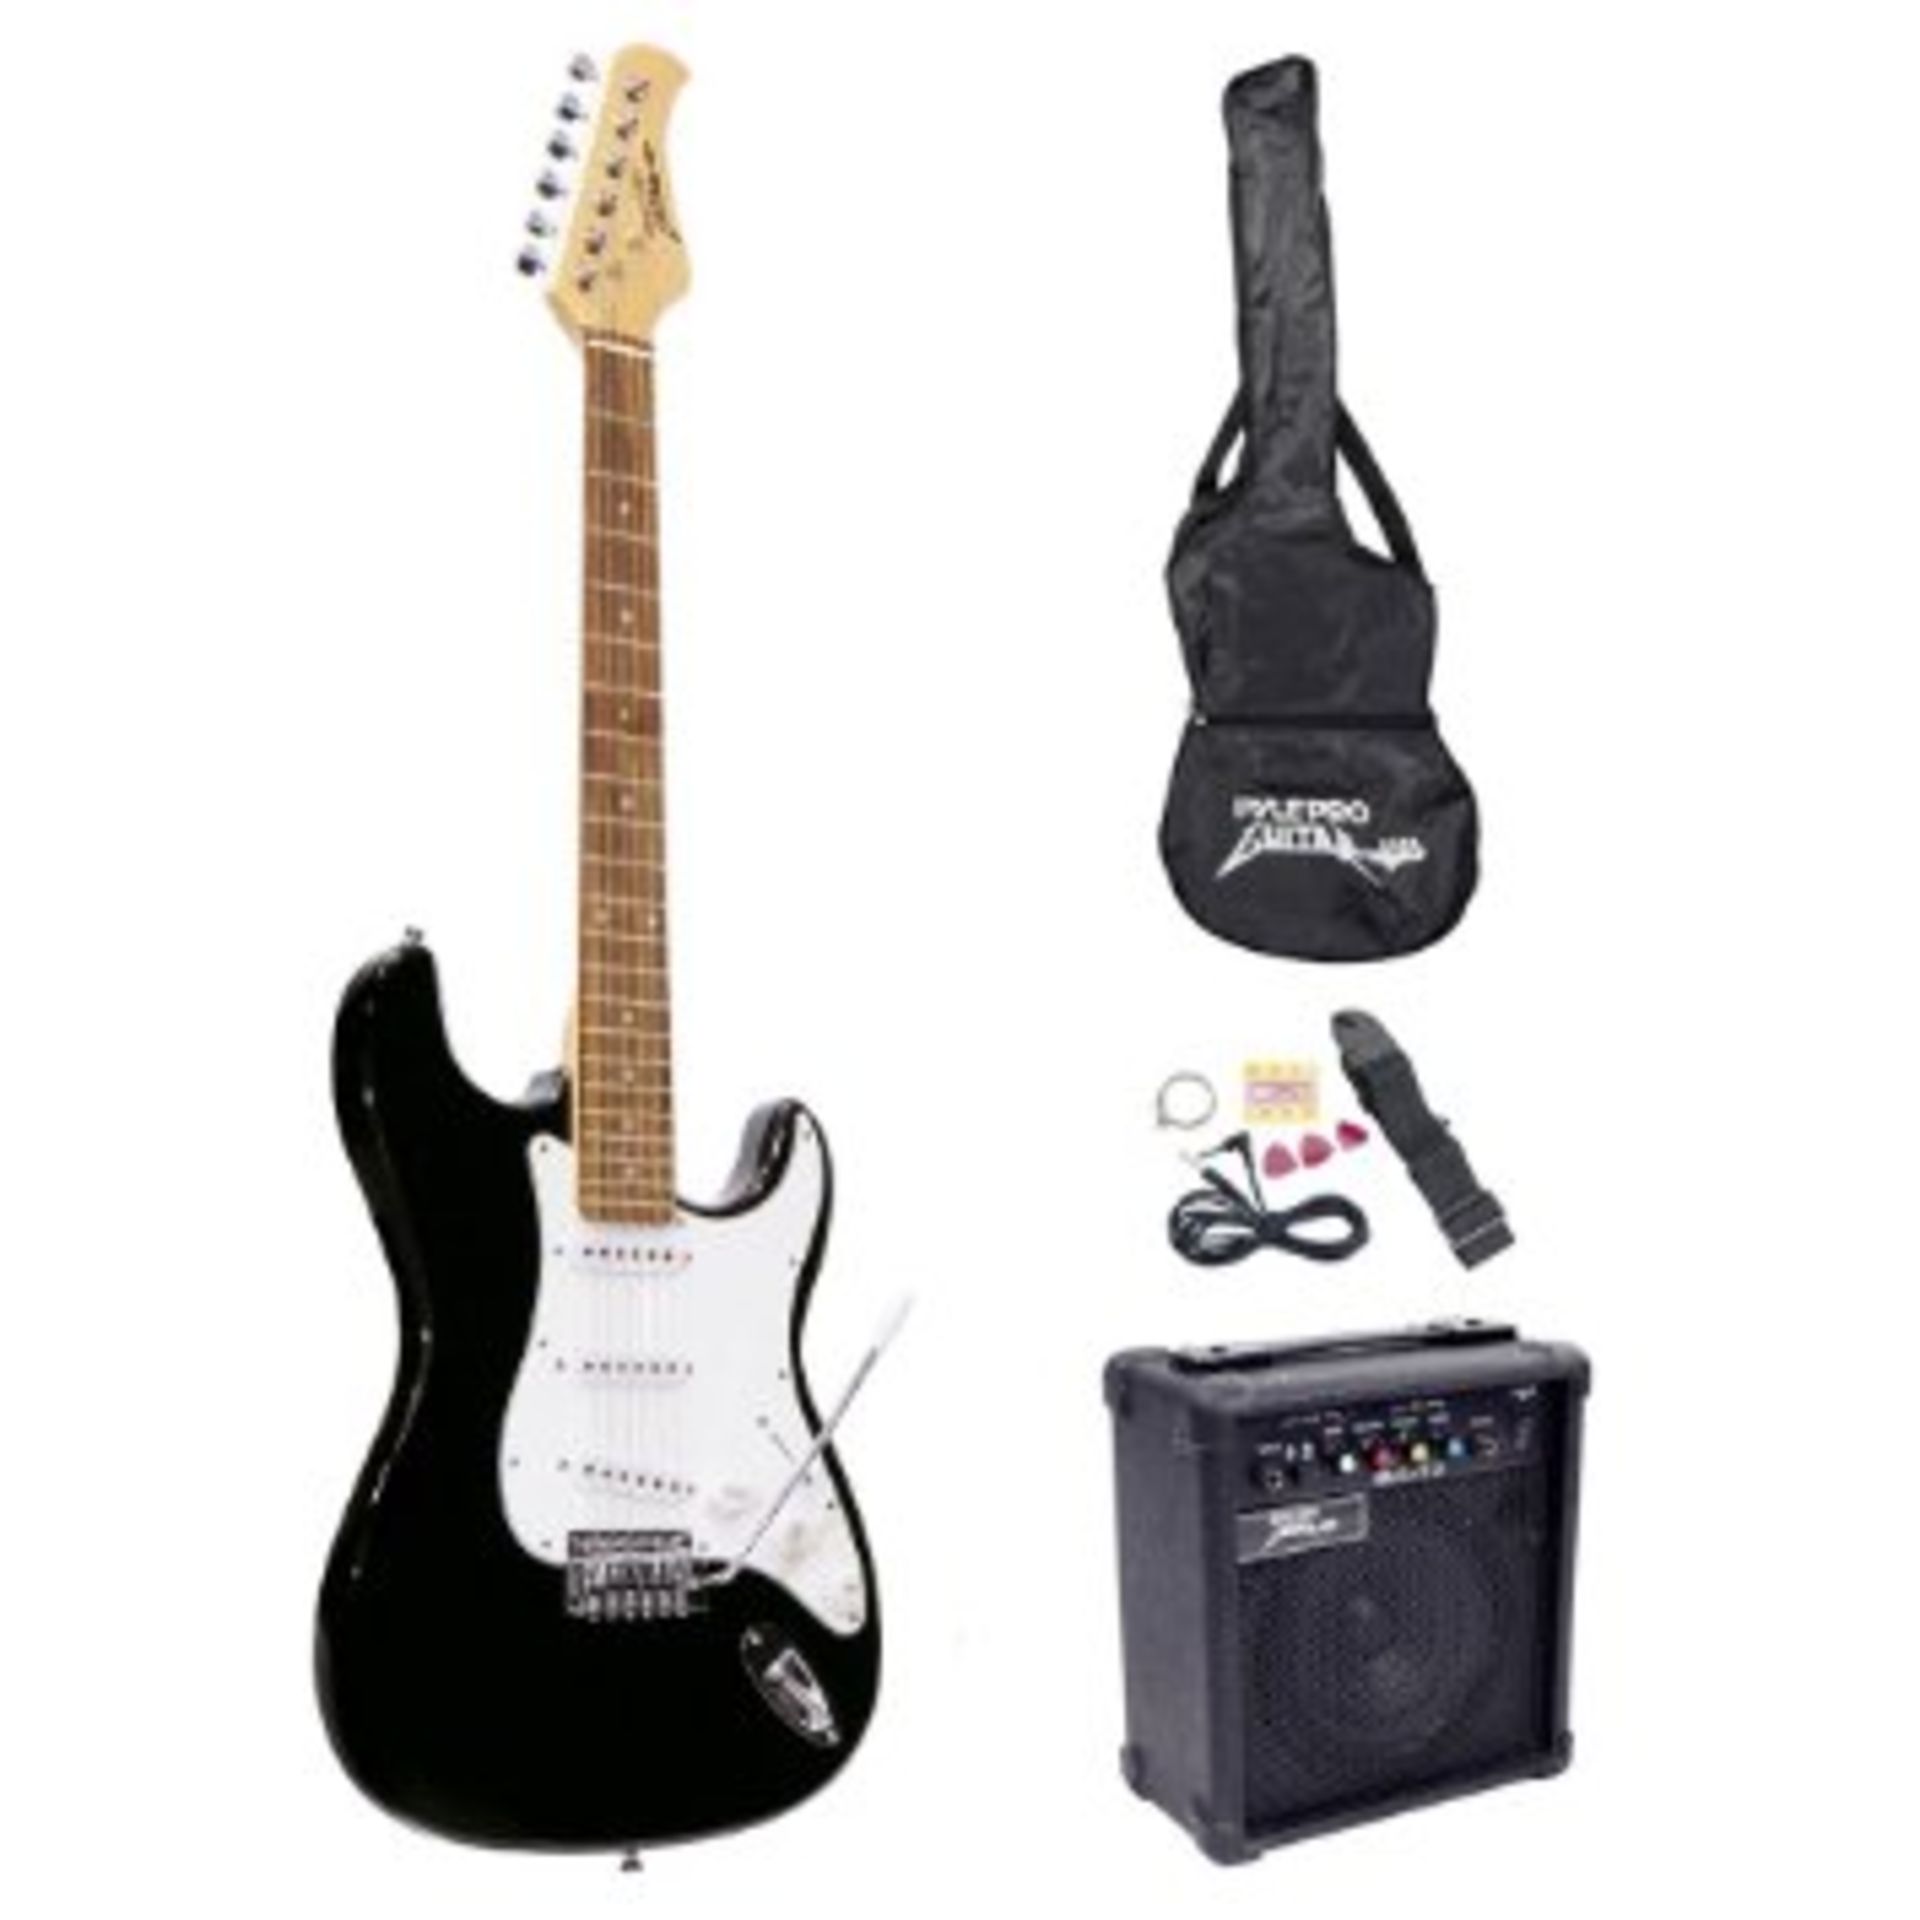 ONE BOXED BRAND NEW ELECTRIC GUITAR IN BLACK WITH ACCESSORIES, 240V WITH 10W AMPLIFIER, BAG, BELT, - Image 2 of 2